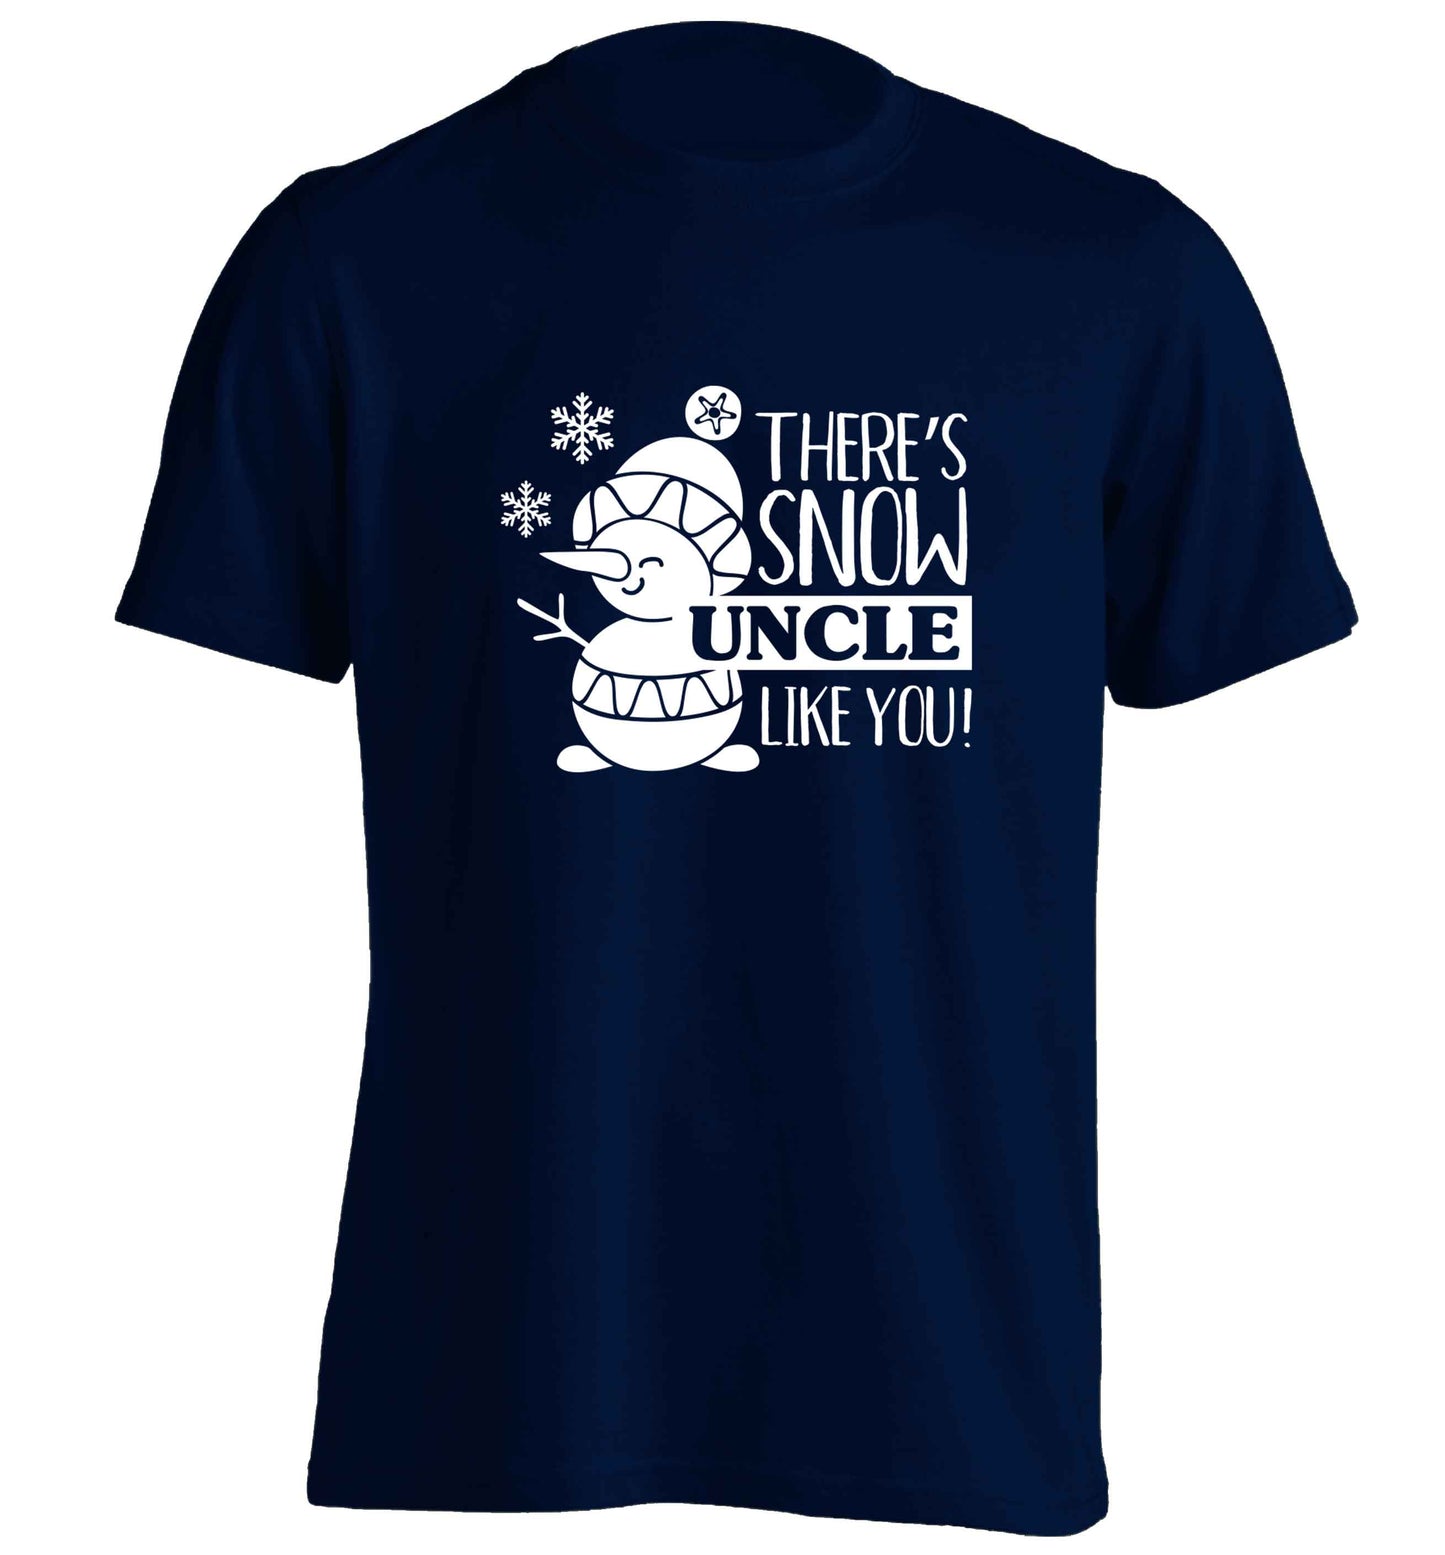 There's snow uncle like you adults unisex navy Tshirt 2XL